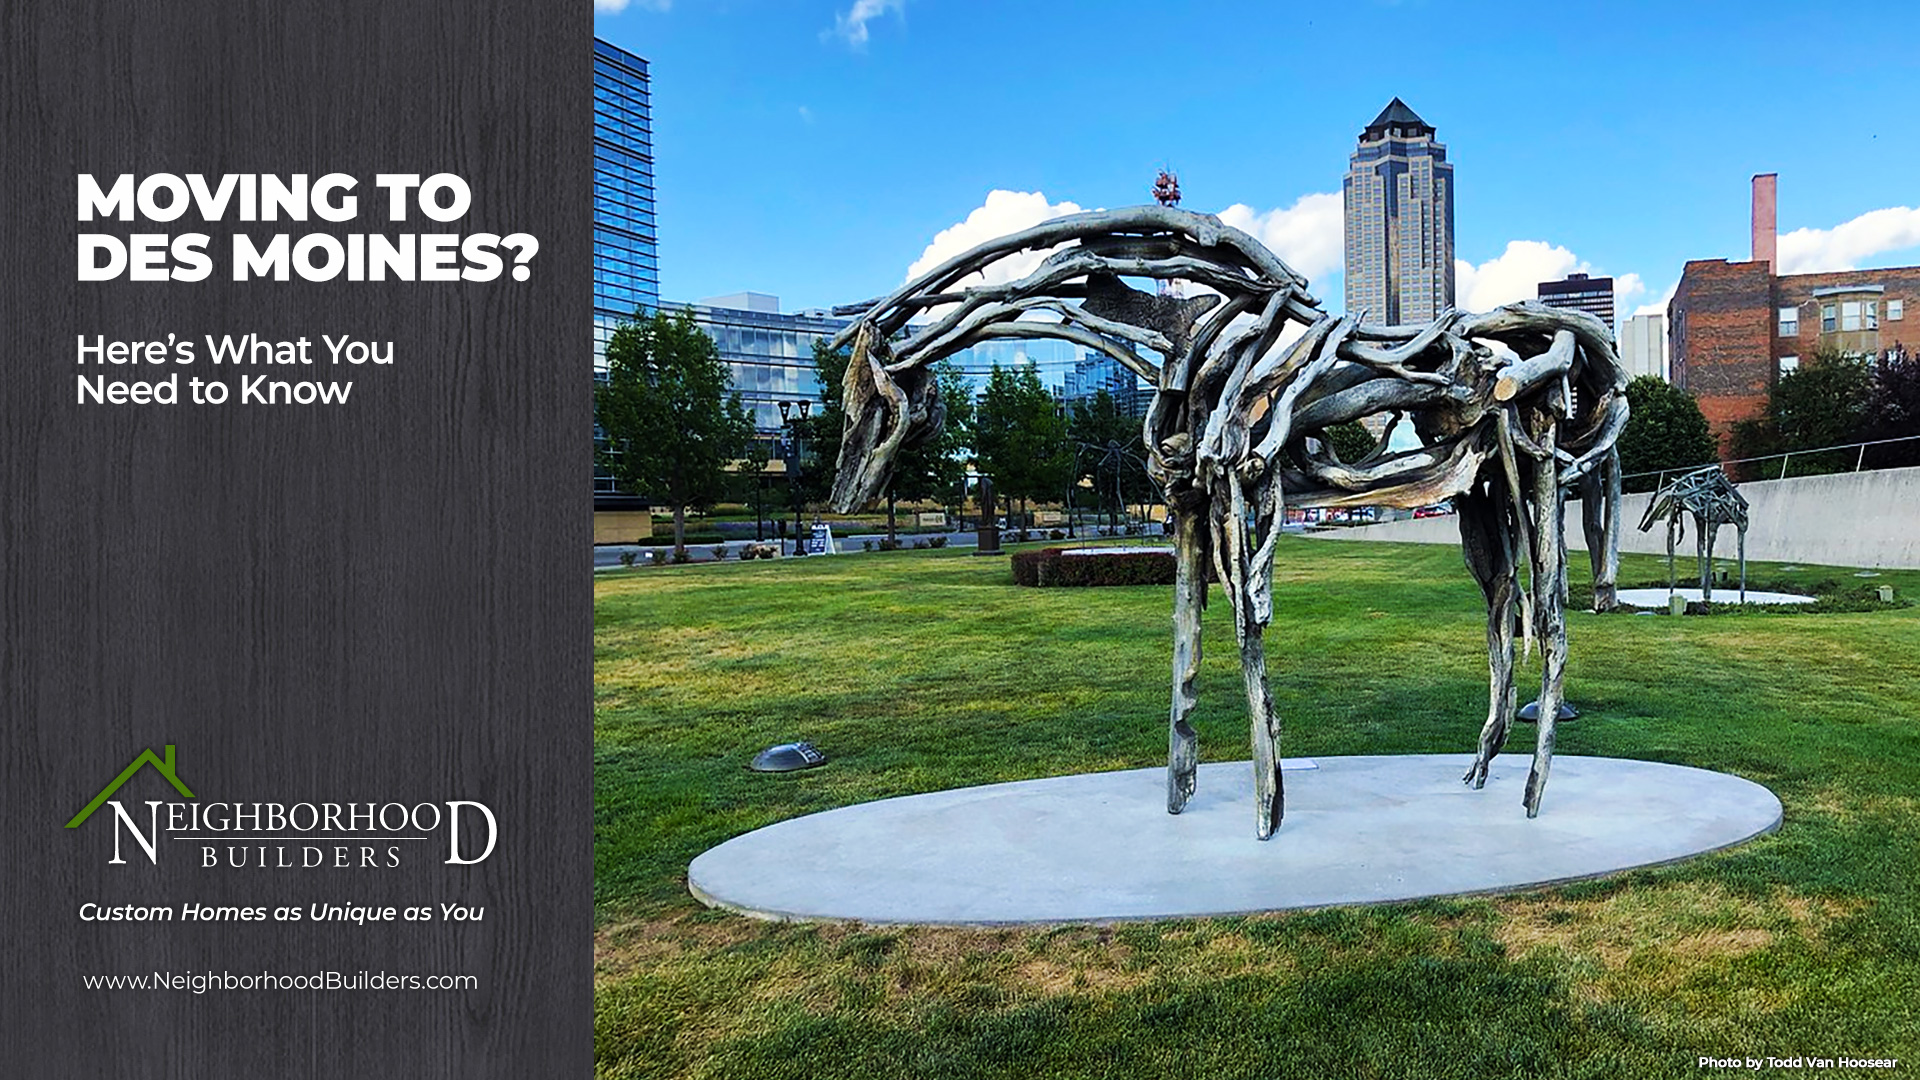 Moving to Des Moines? 6 Important Things You Need to Know | Photo by Todd Van Hoosear